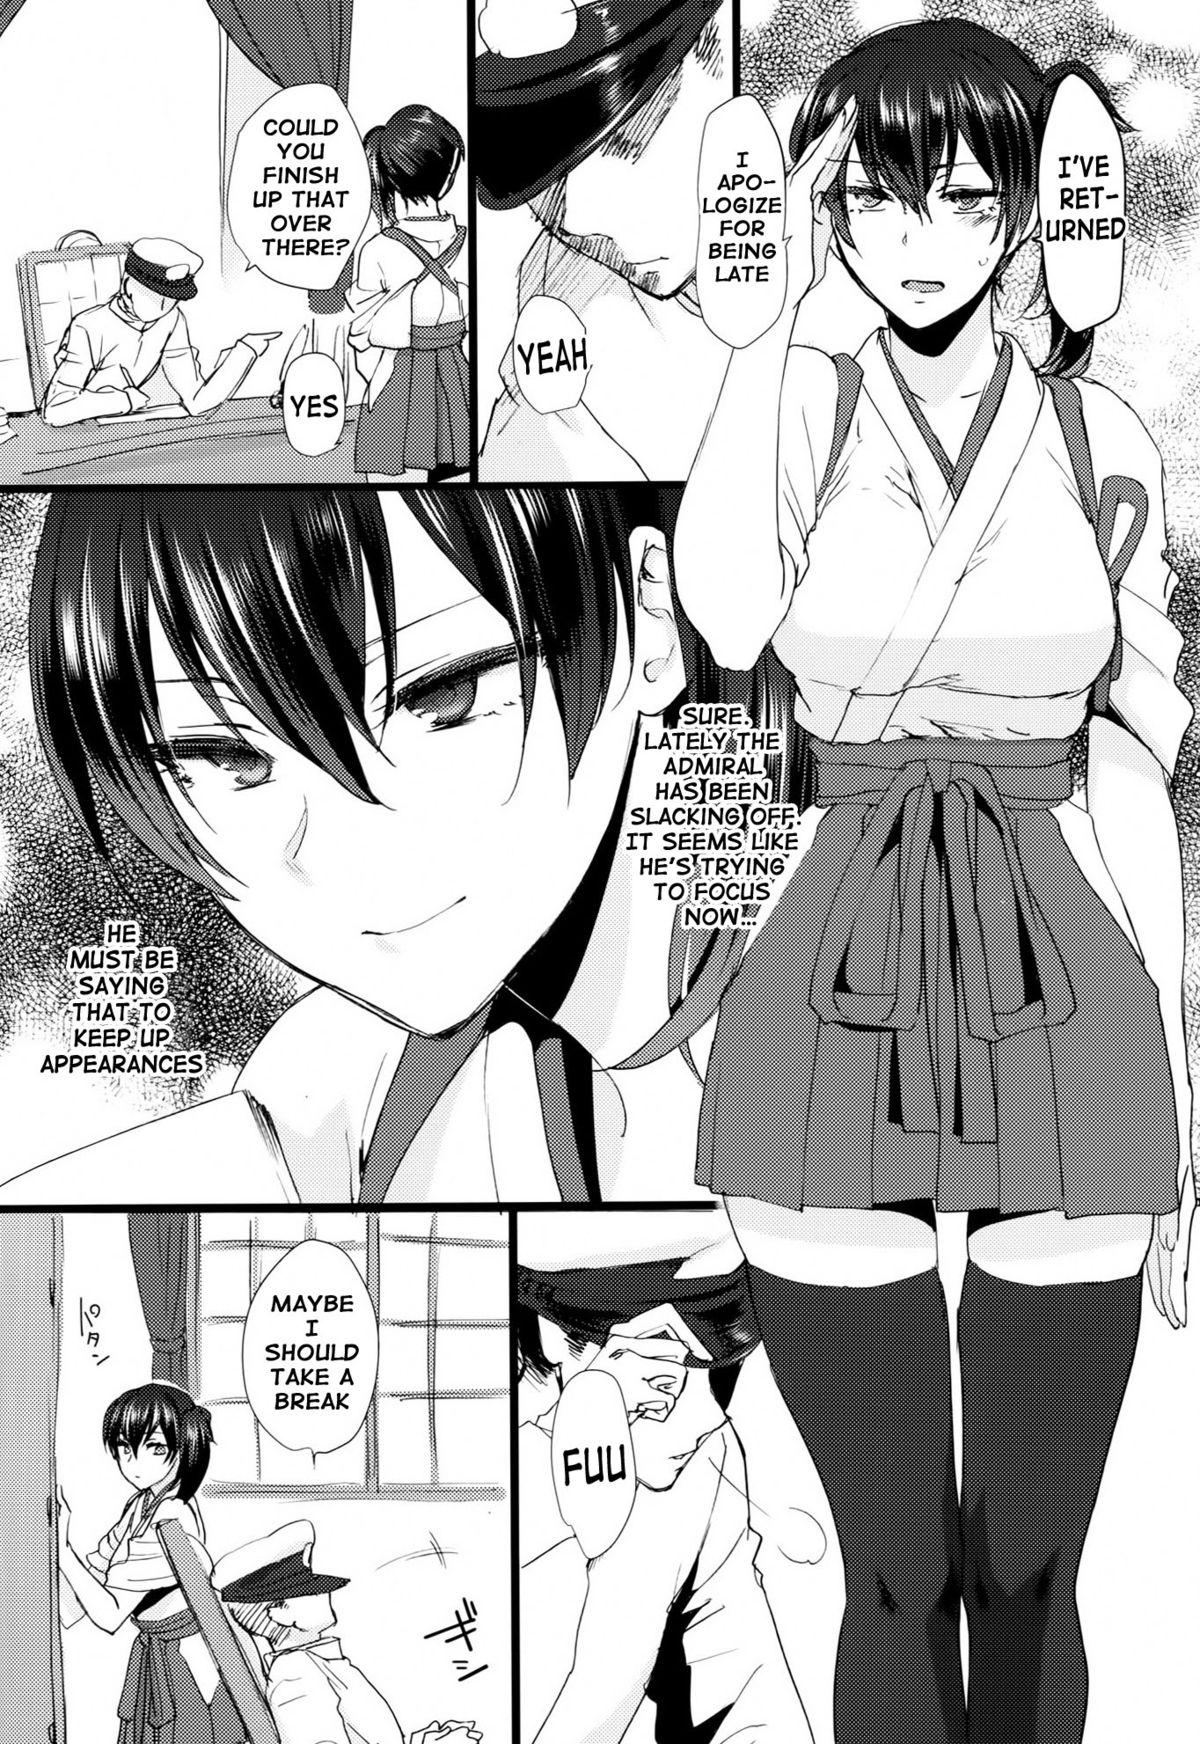 Relax Stoicism - Kantai collection Sharing - Page 5